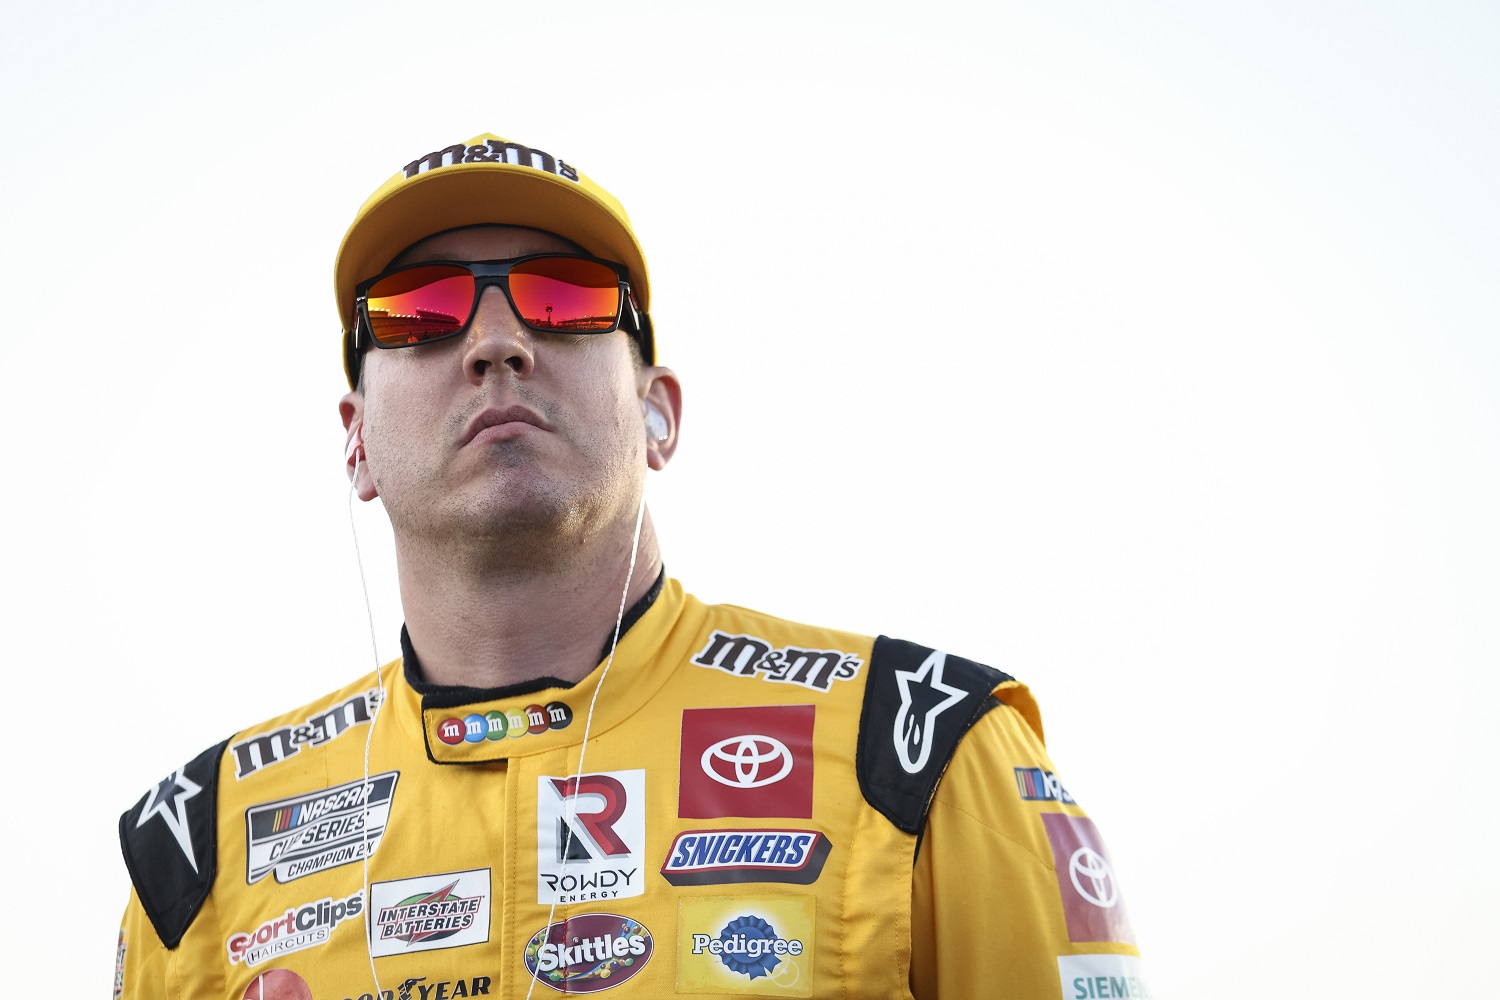 Kyle Busch looks on during practice for the NASCAR Cup Series Coca-Cola 600 at Charlotte Motor Speedway on May 28, 2022 in Concord, North Carolina. | James Gilbert/Getty Images